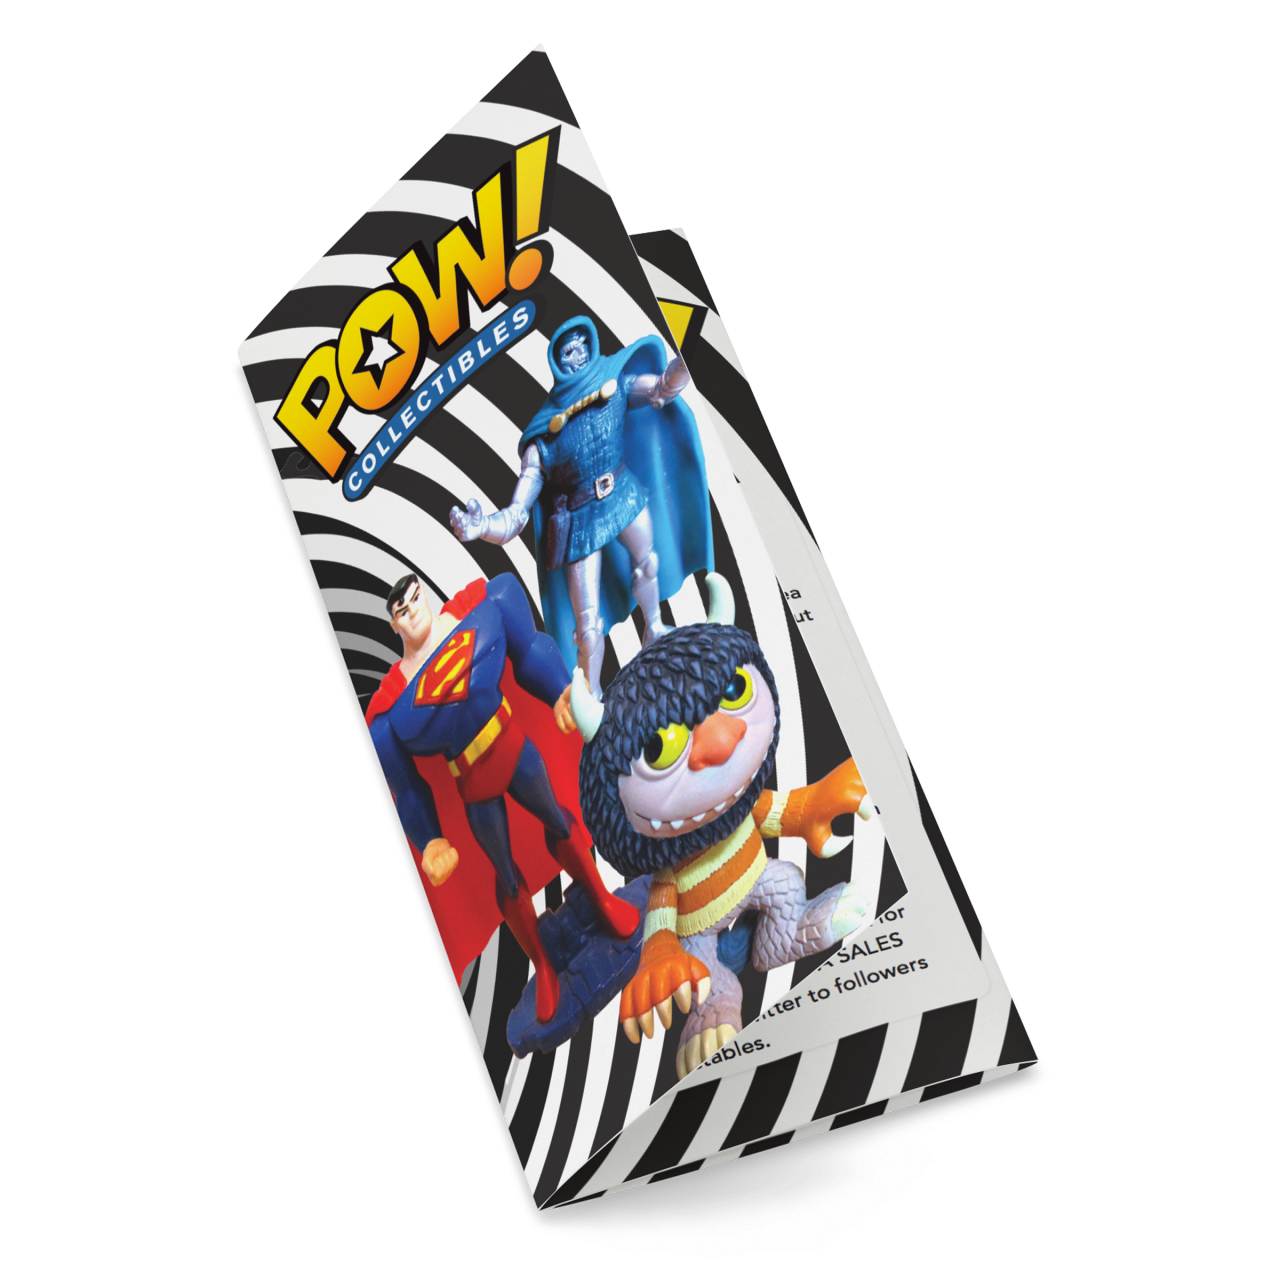 Image of Pow Collectibles logo on brochure